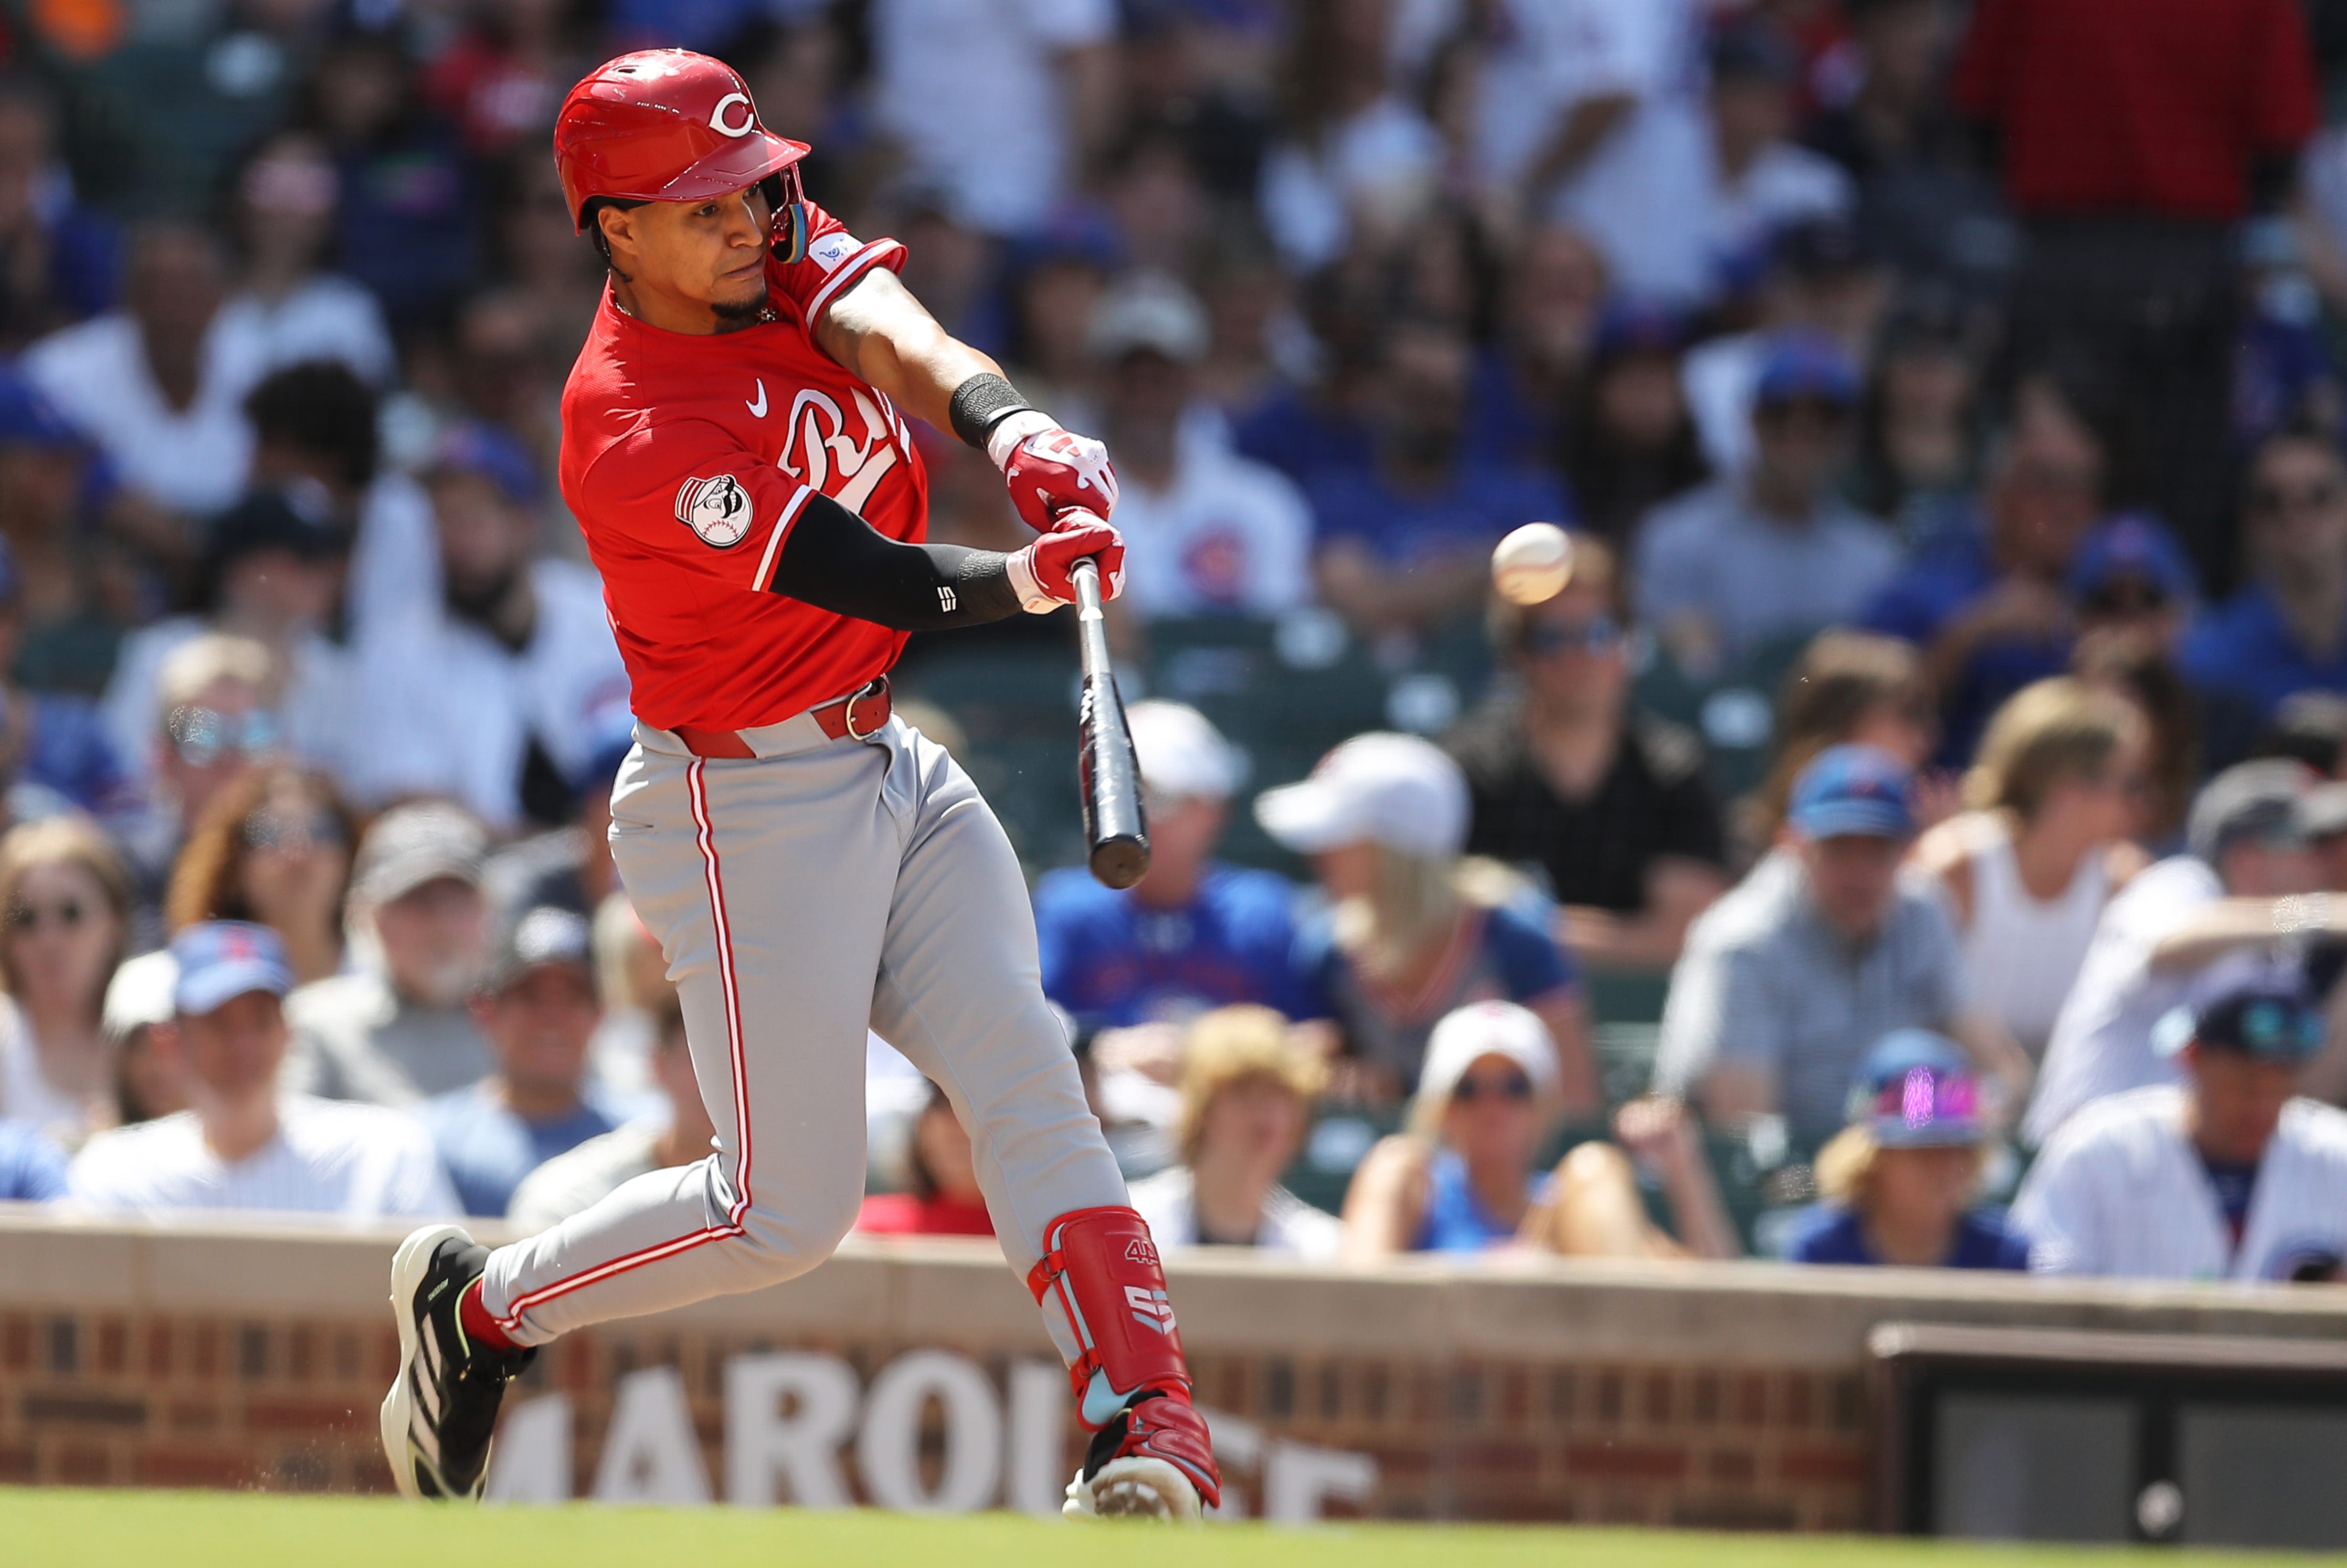 Reds look to carry momentum into June in Game 2 against Cubs